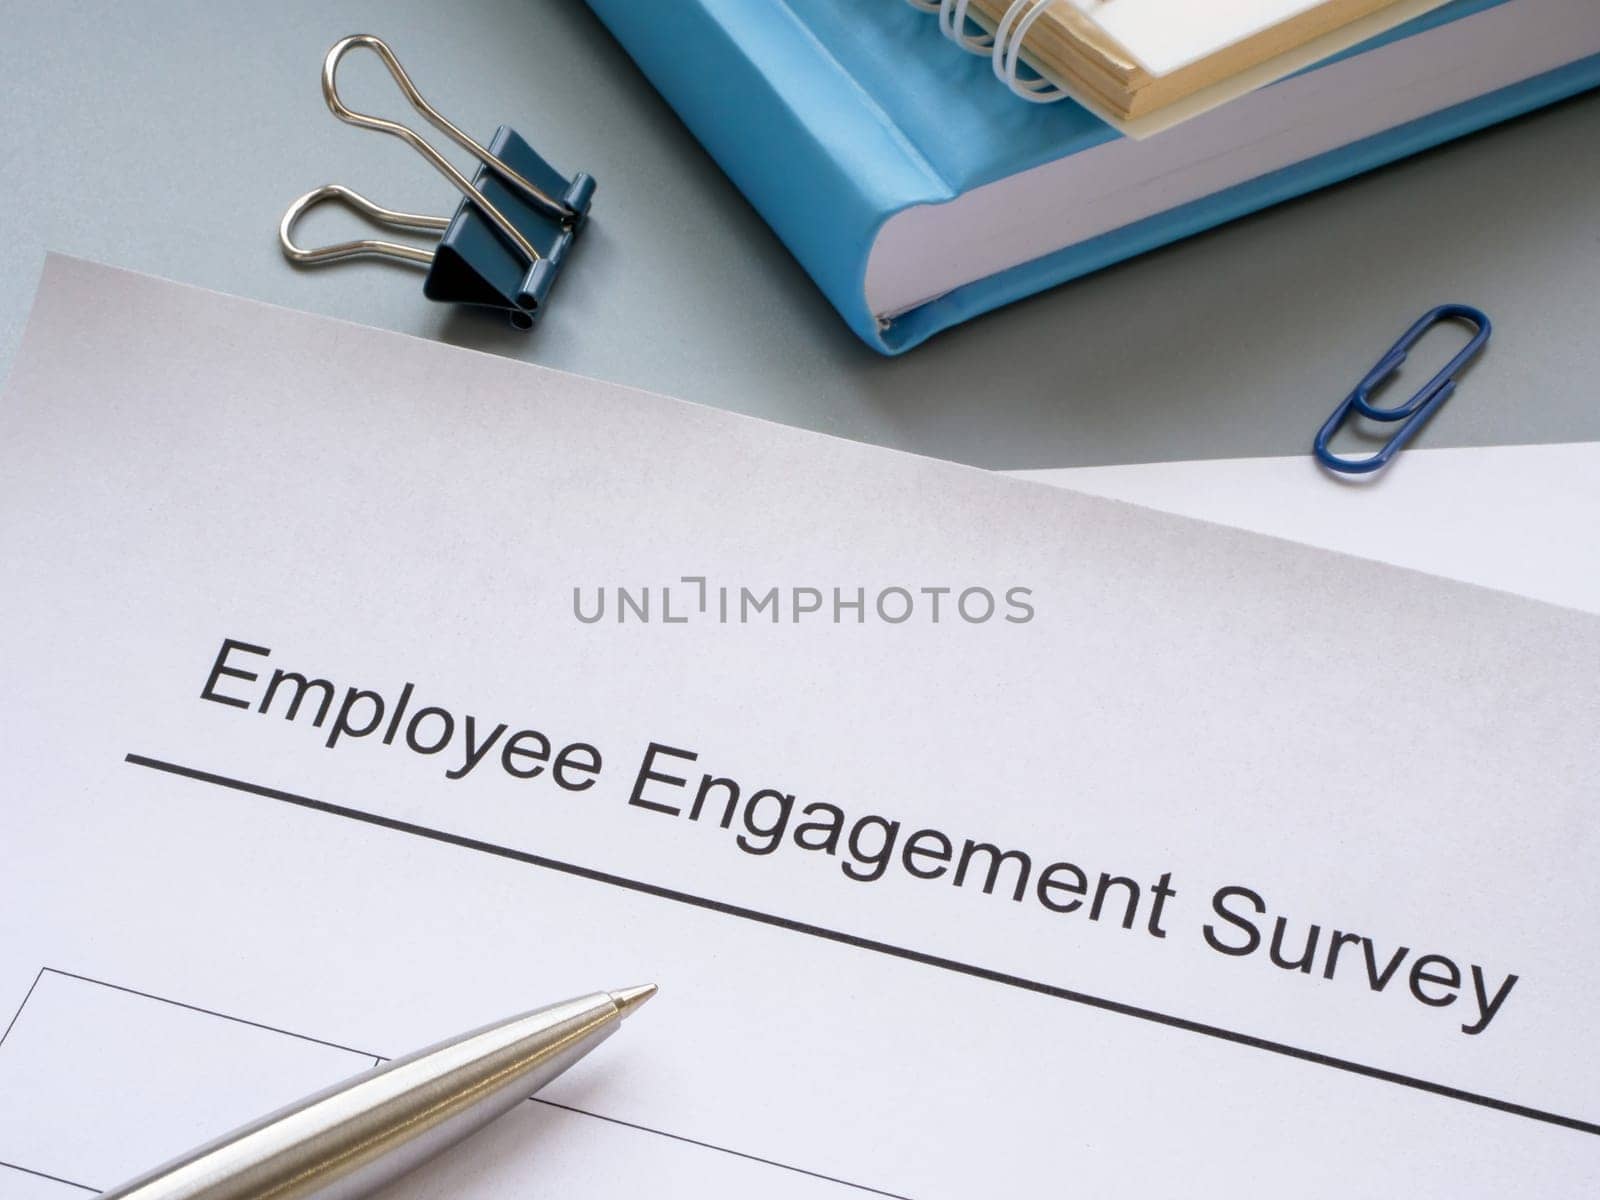 Employee engagement survey, notepads and pen. by designer491